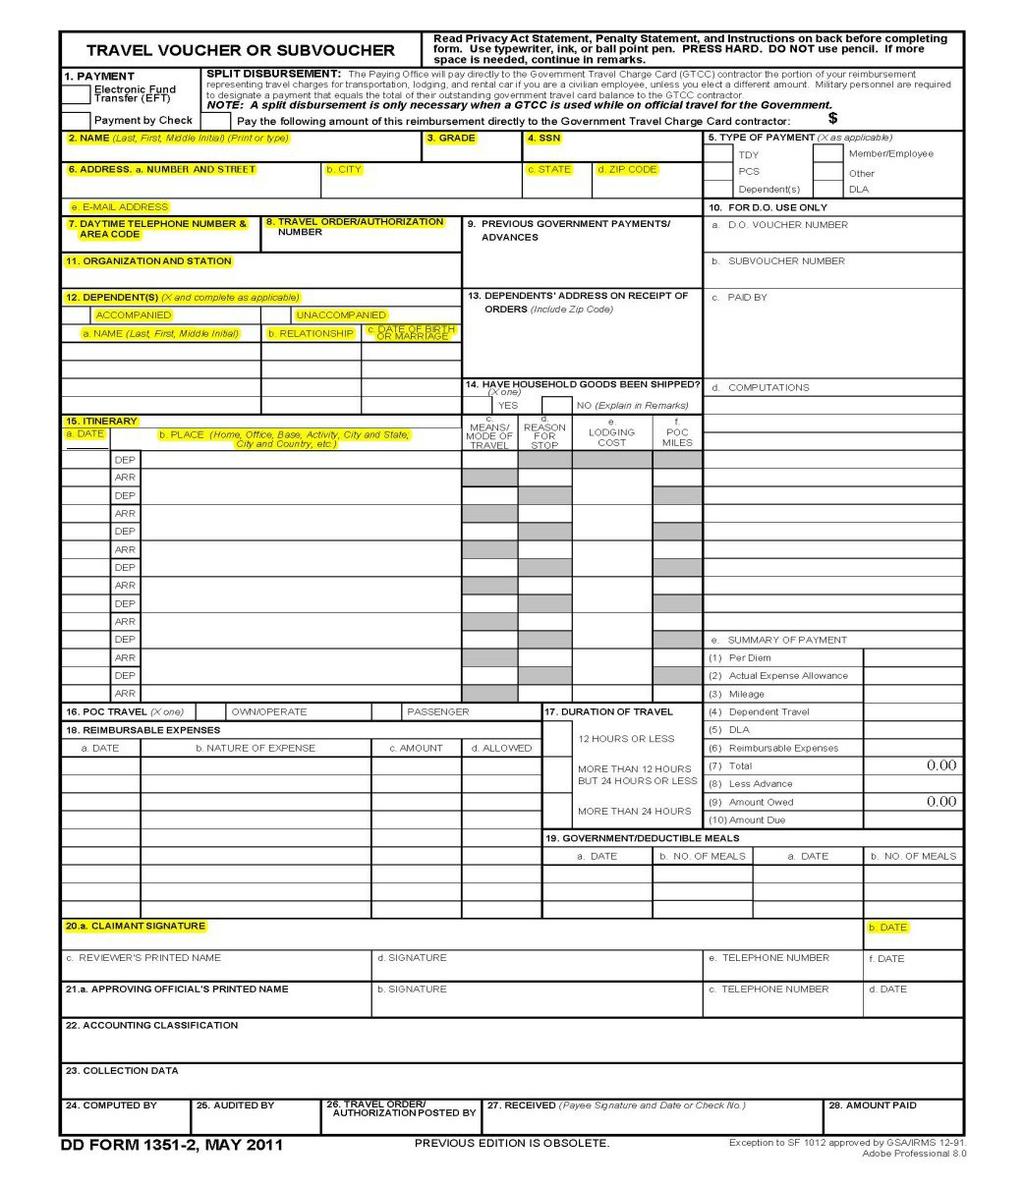 DD FORM 1351-2 All of the highlighted fields are required City, ST(Origin) City, ST (Dest.